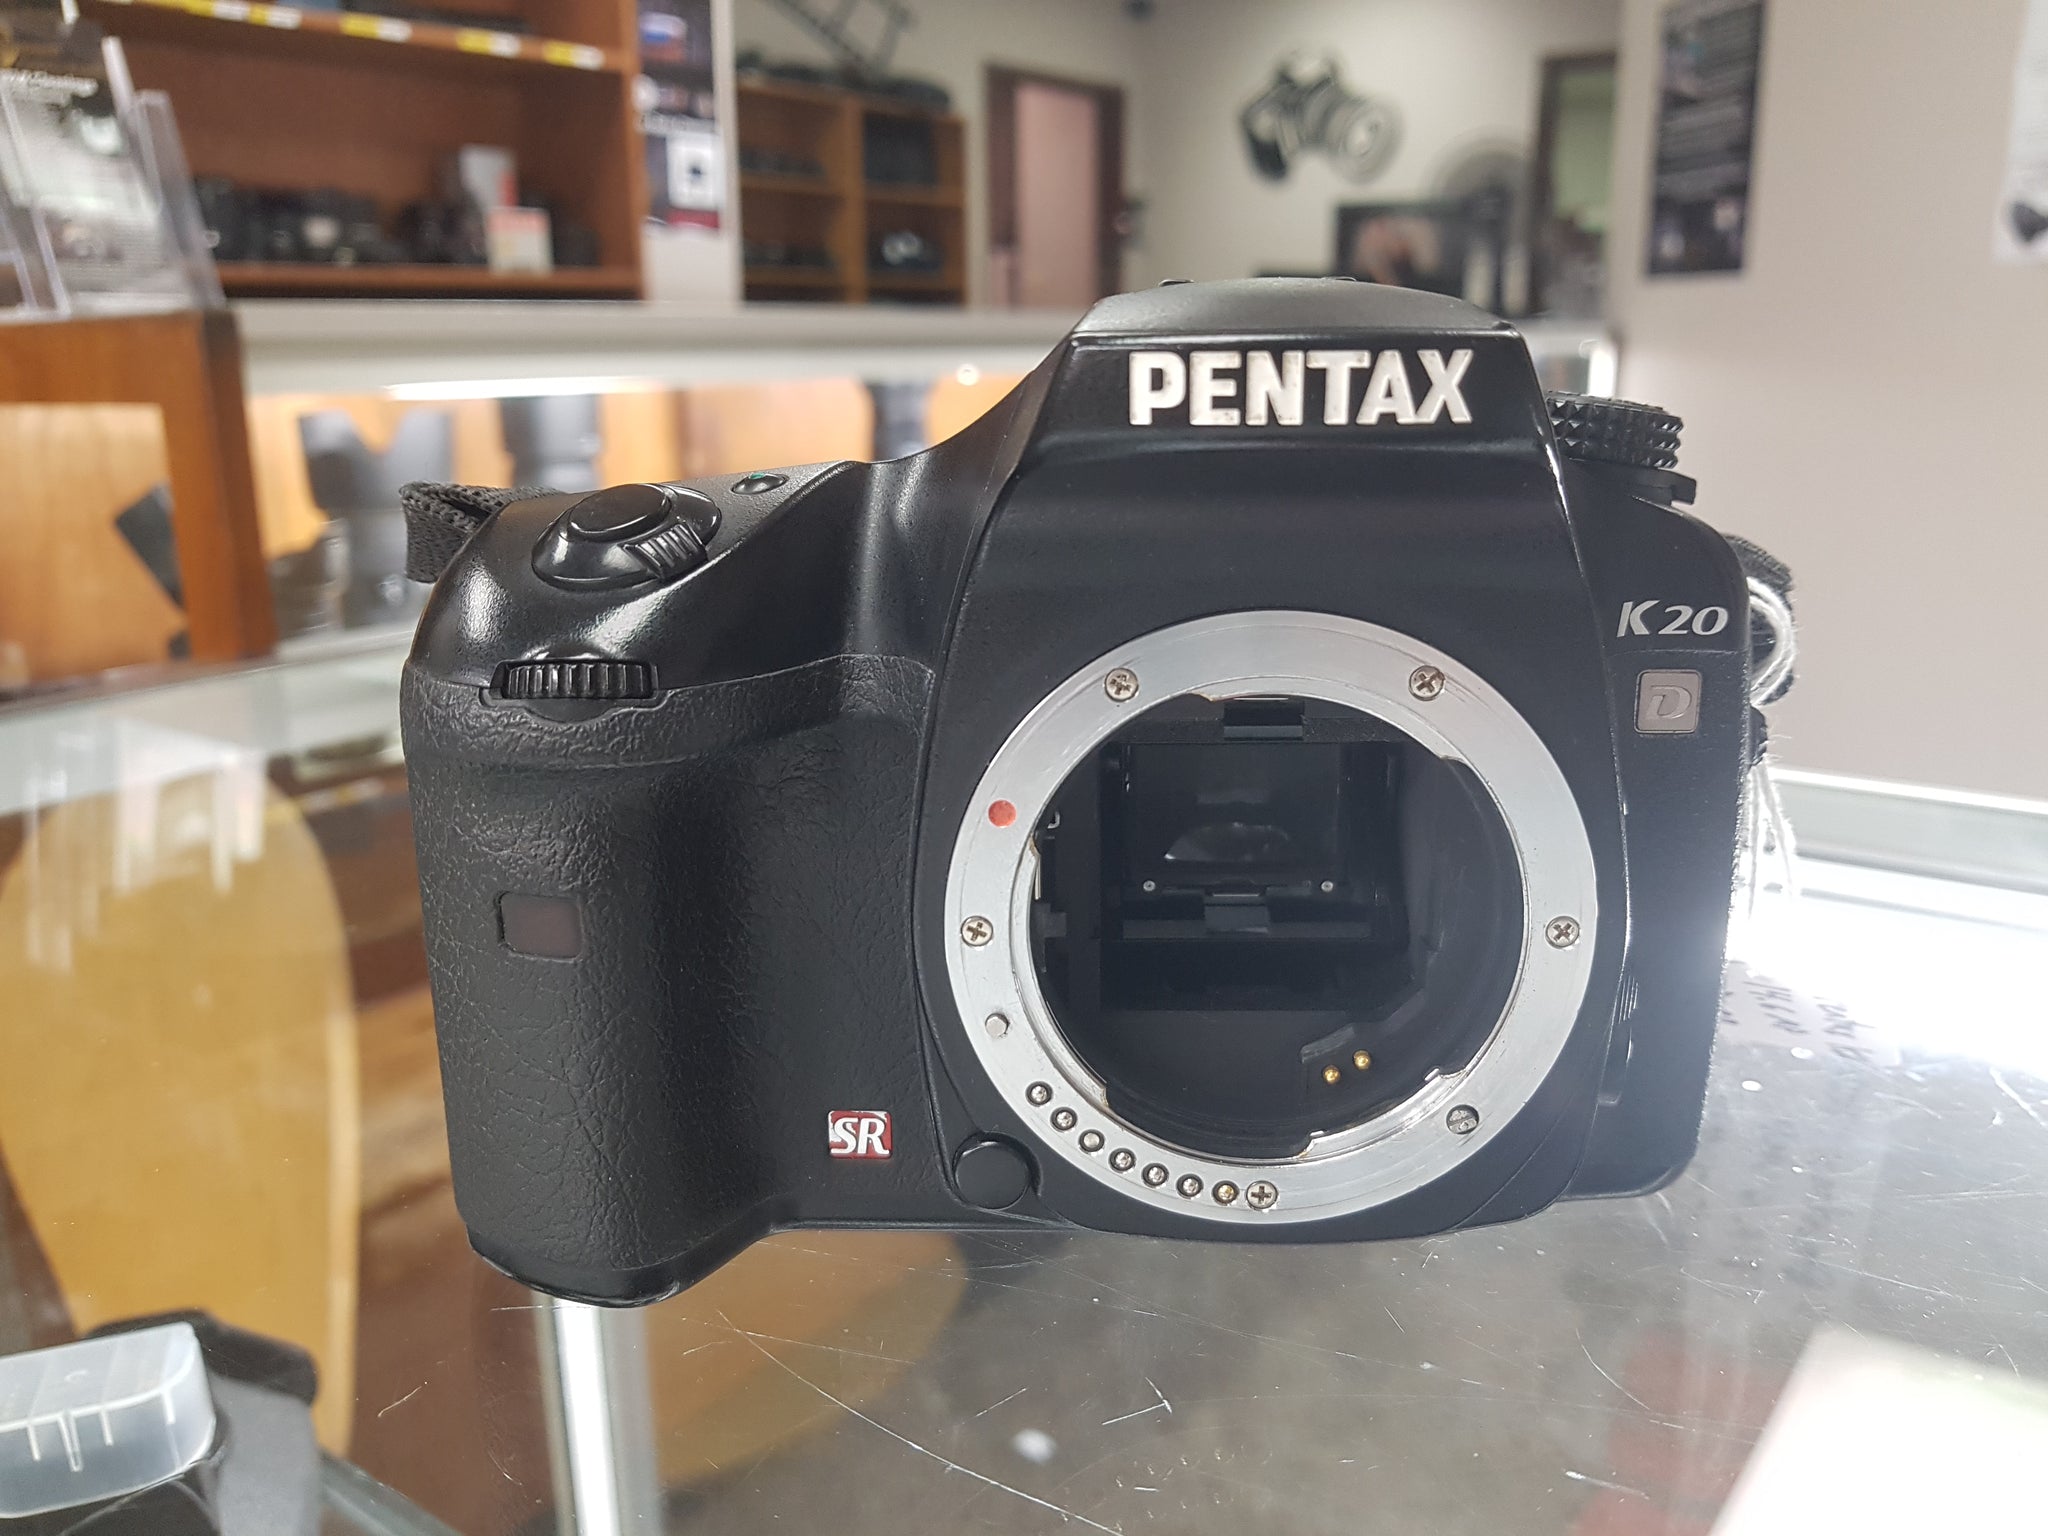 Pentax K20 D DSLR 14.6MP Digital Camera, Cleaned, Inspected and 90